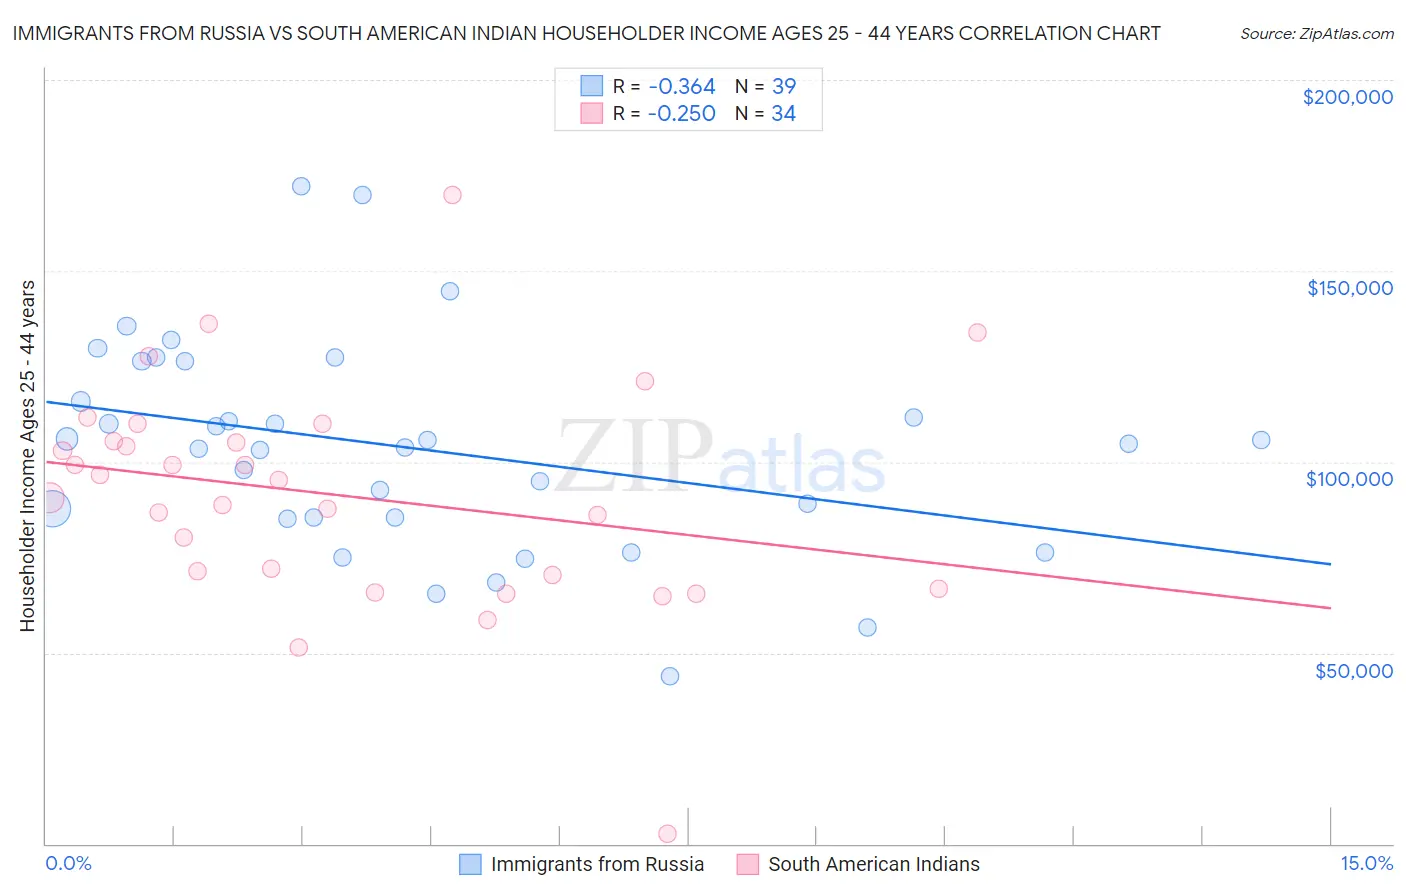 Immigrants from Russia vs South American Indian Householder Income Ages 25 - 44 years